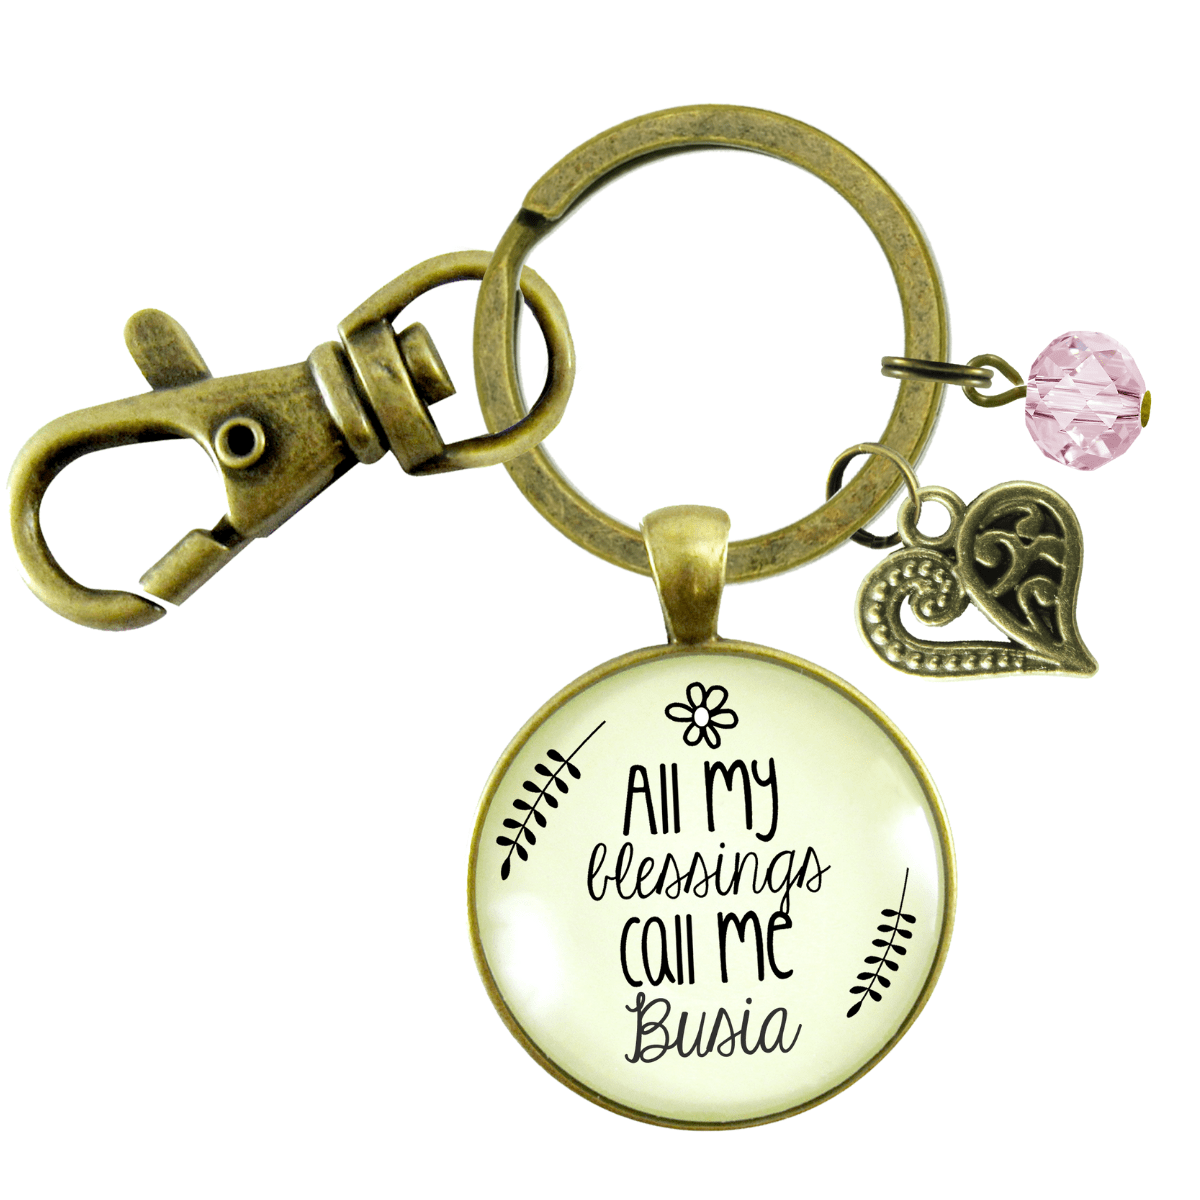 Busia Keychain All My Blessings Polish Grandma Womens Family Gift Jewelry - Gutsy Goodness Handmade Jewelry;Busia Keychain All My Blessings Polish Grandma Womens Family Gift Jewelry - Gutsy Goodness Handmade Jewelry Gifts